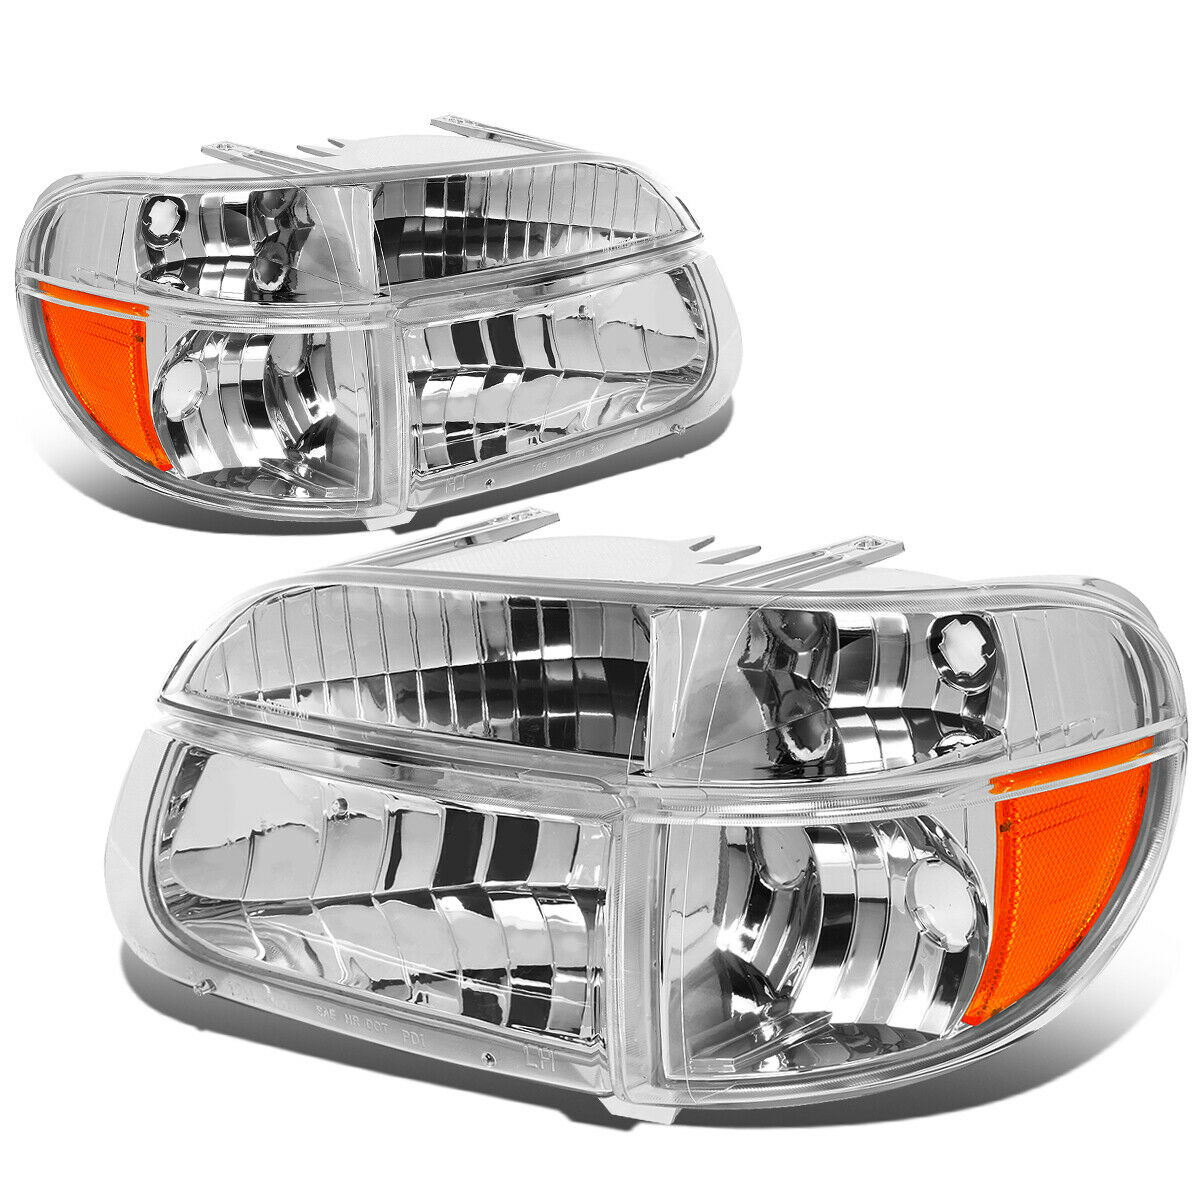 Country Coach Allure Diamond Clear Chrome Headlights & Signal Lamps 4 Piece Set (Left & Right)